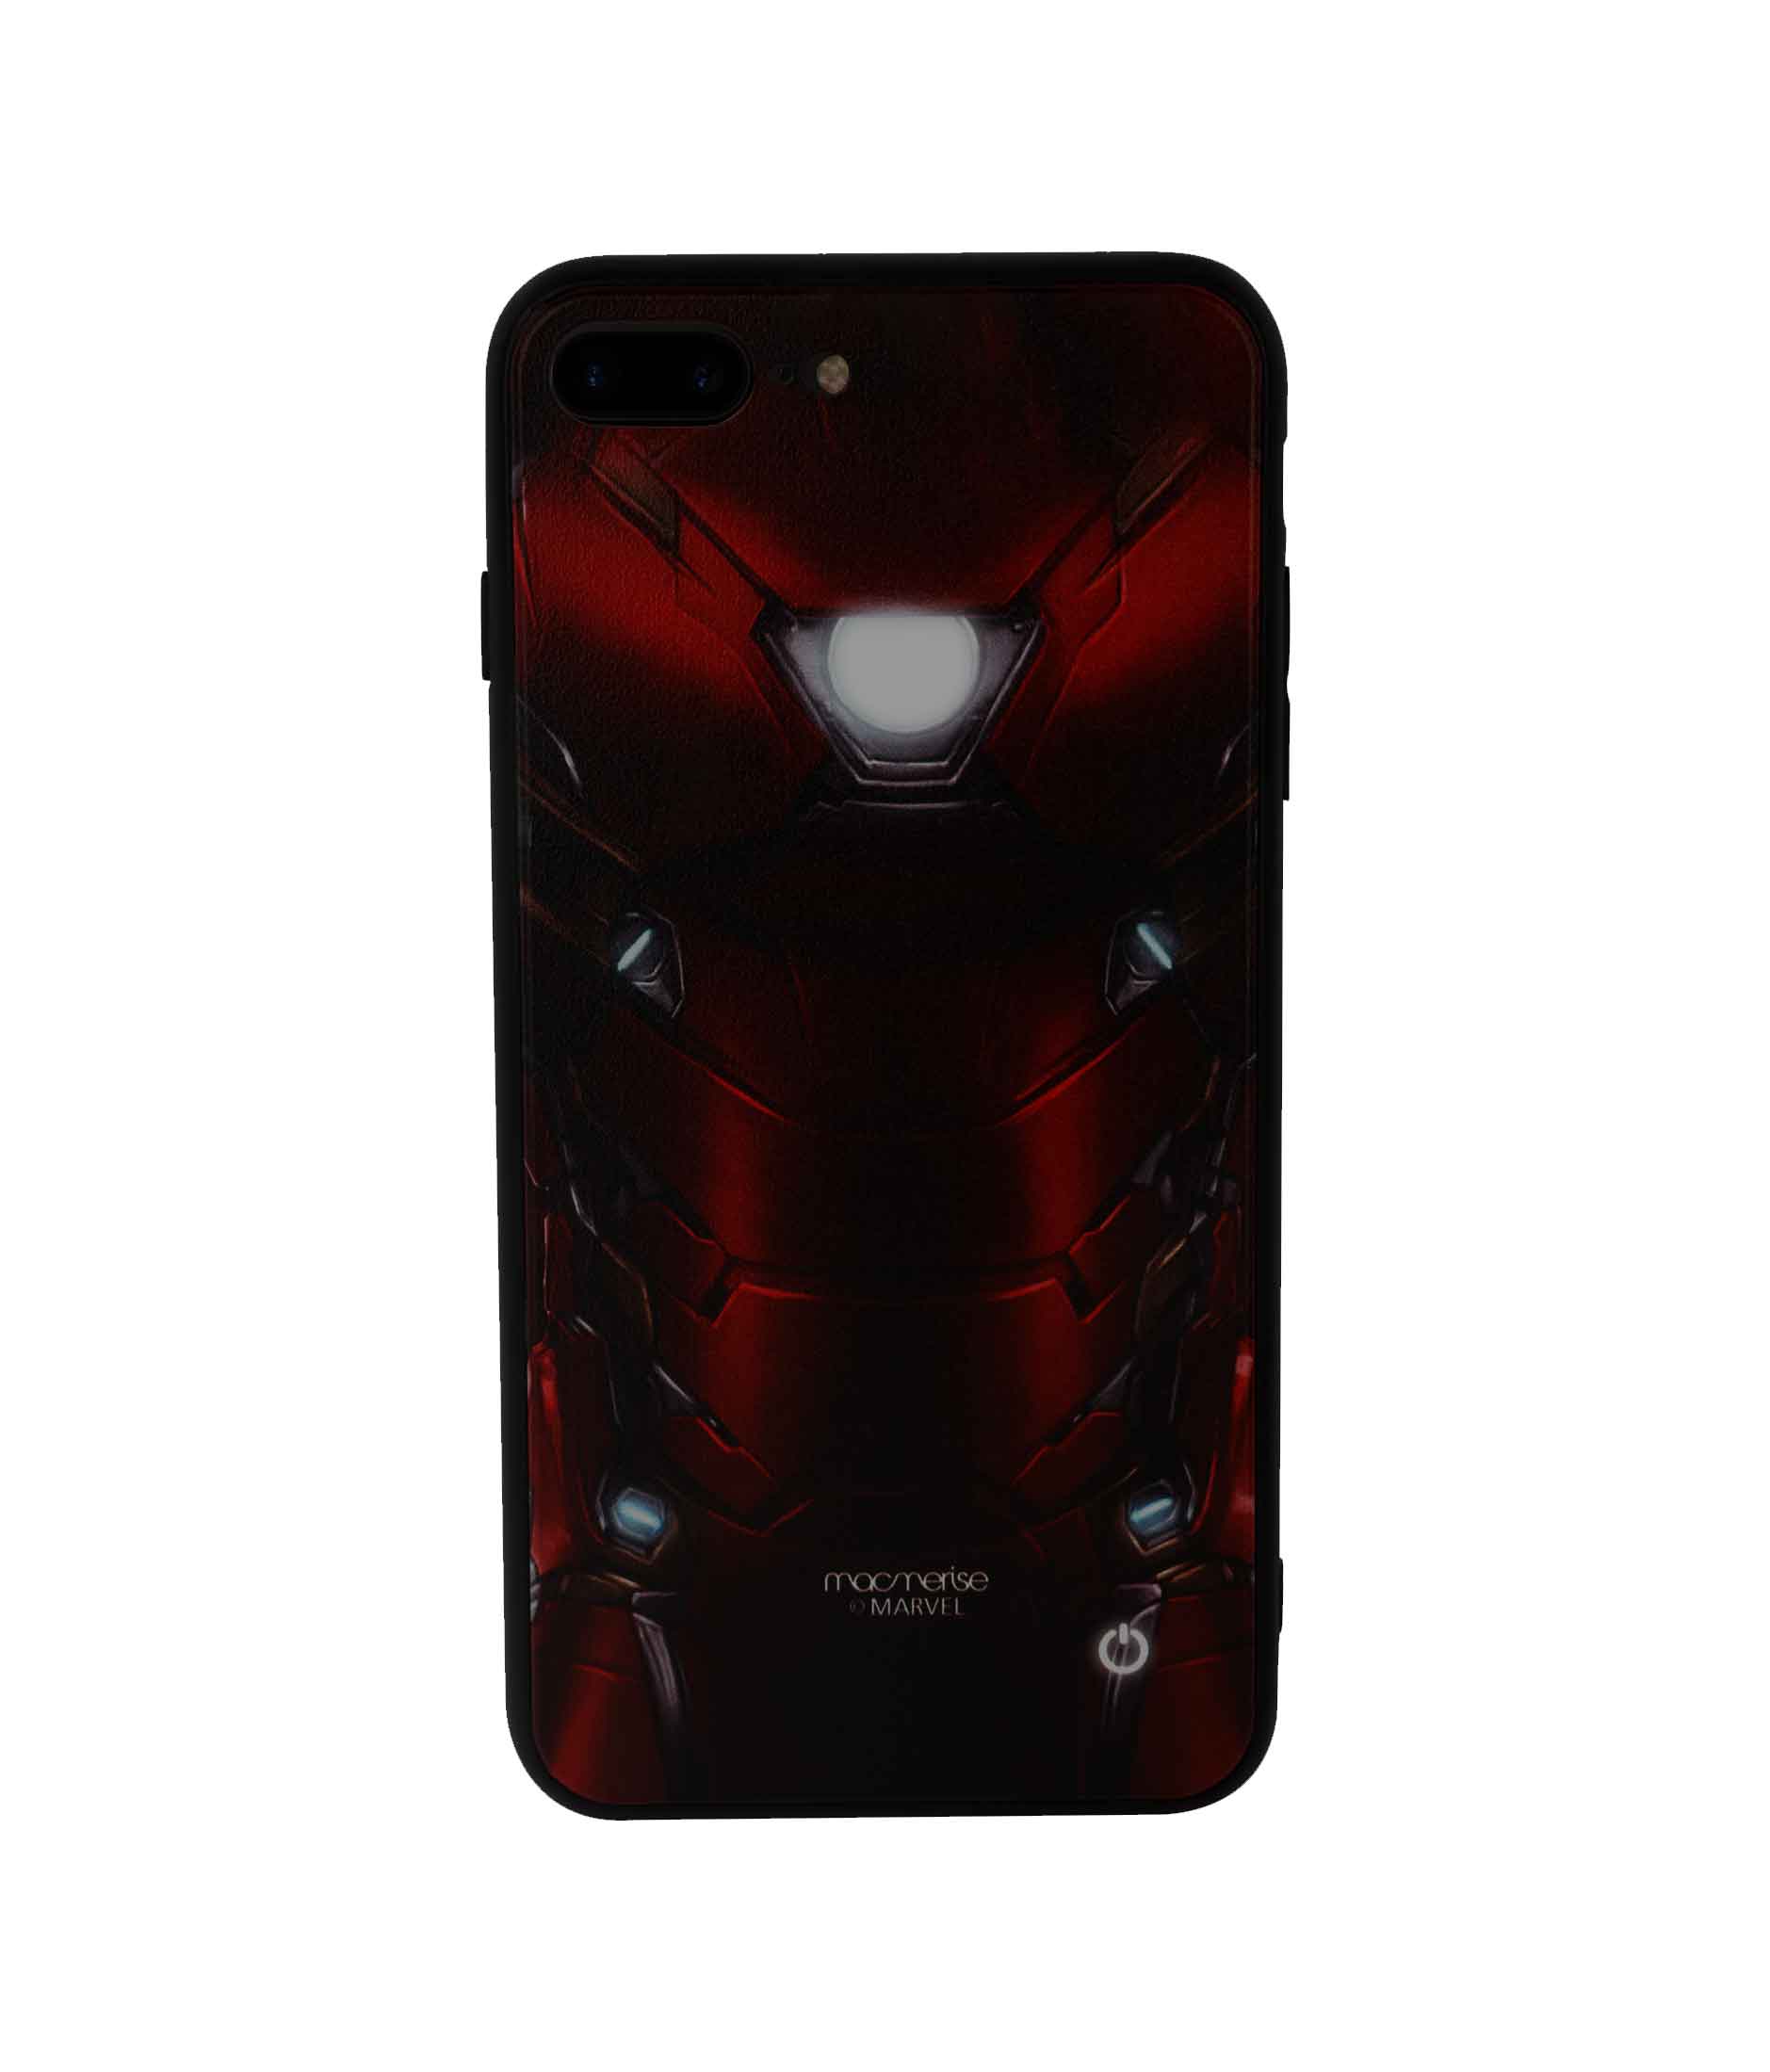 Suit up Ironman - Lumous LED Phone Case for iPhone 7 Plus